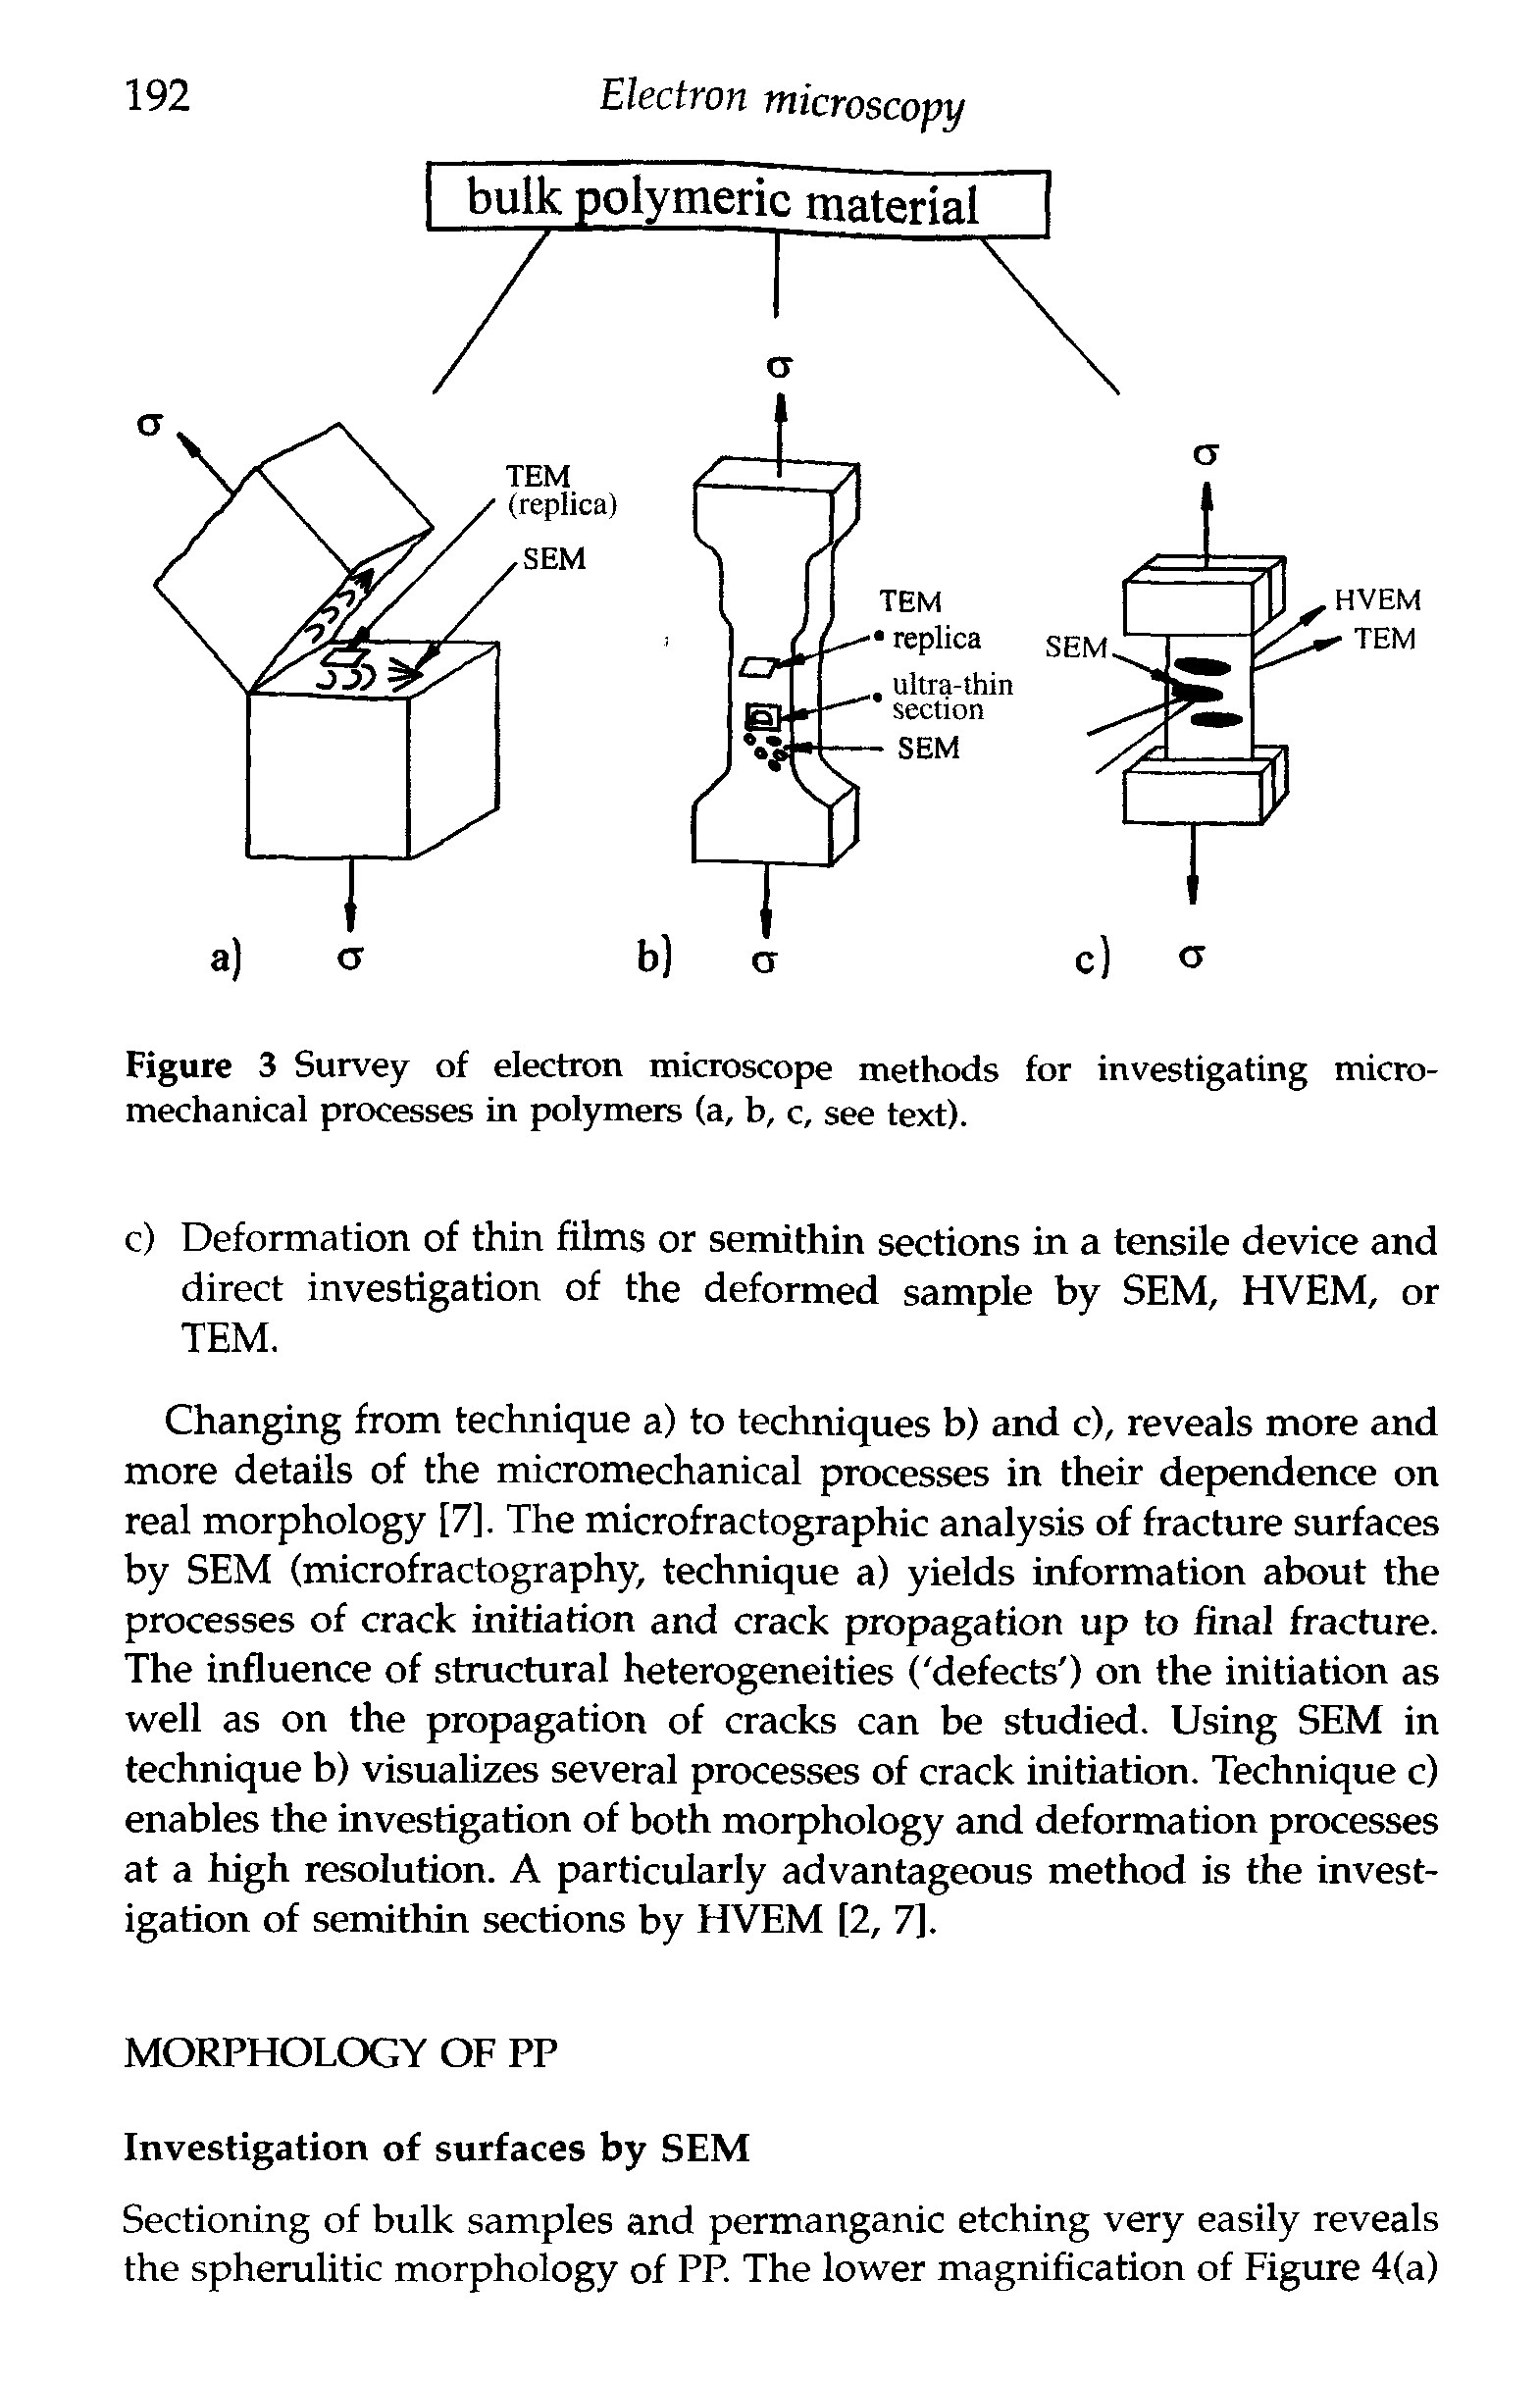 Figure 3 Survey of electron microscope methods for investigating micromechanical processes in polymers (a, b, c, see text).